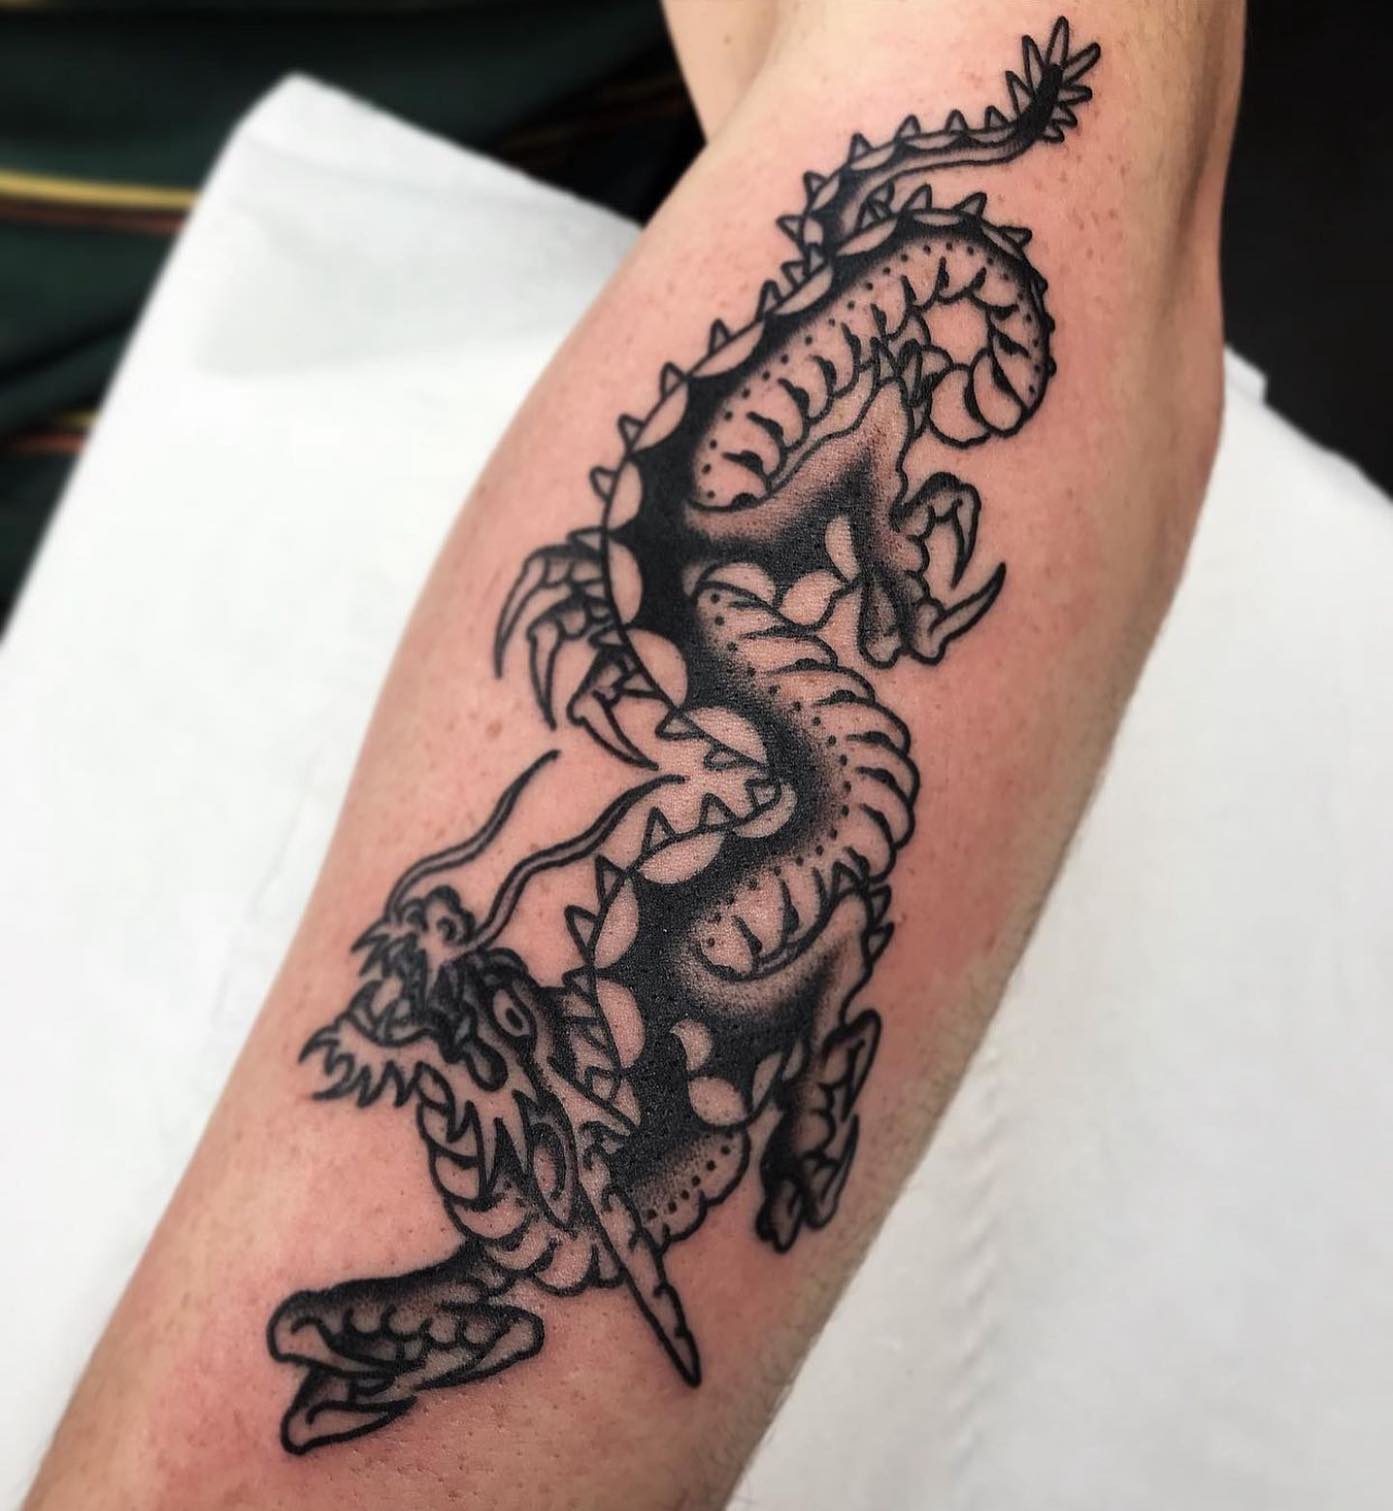 rvltattoo liked this tattoo so much, he posted it twice on his Instagram! We thought it would only be fair for us to post it too 🤪

If you would like to get tattooed, then please fill out the tattoo enquiry form on our website 💫

                         totaltattoo barber_dts easytattoo_uk eternalink dynamiccolor lockdownneedle stencilstuff    